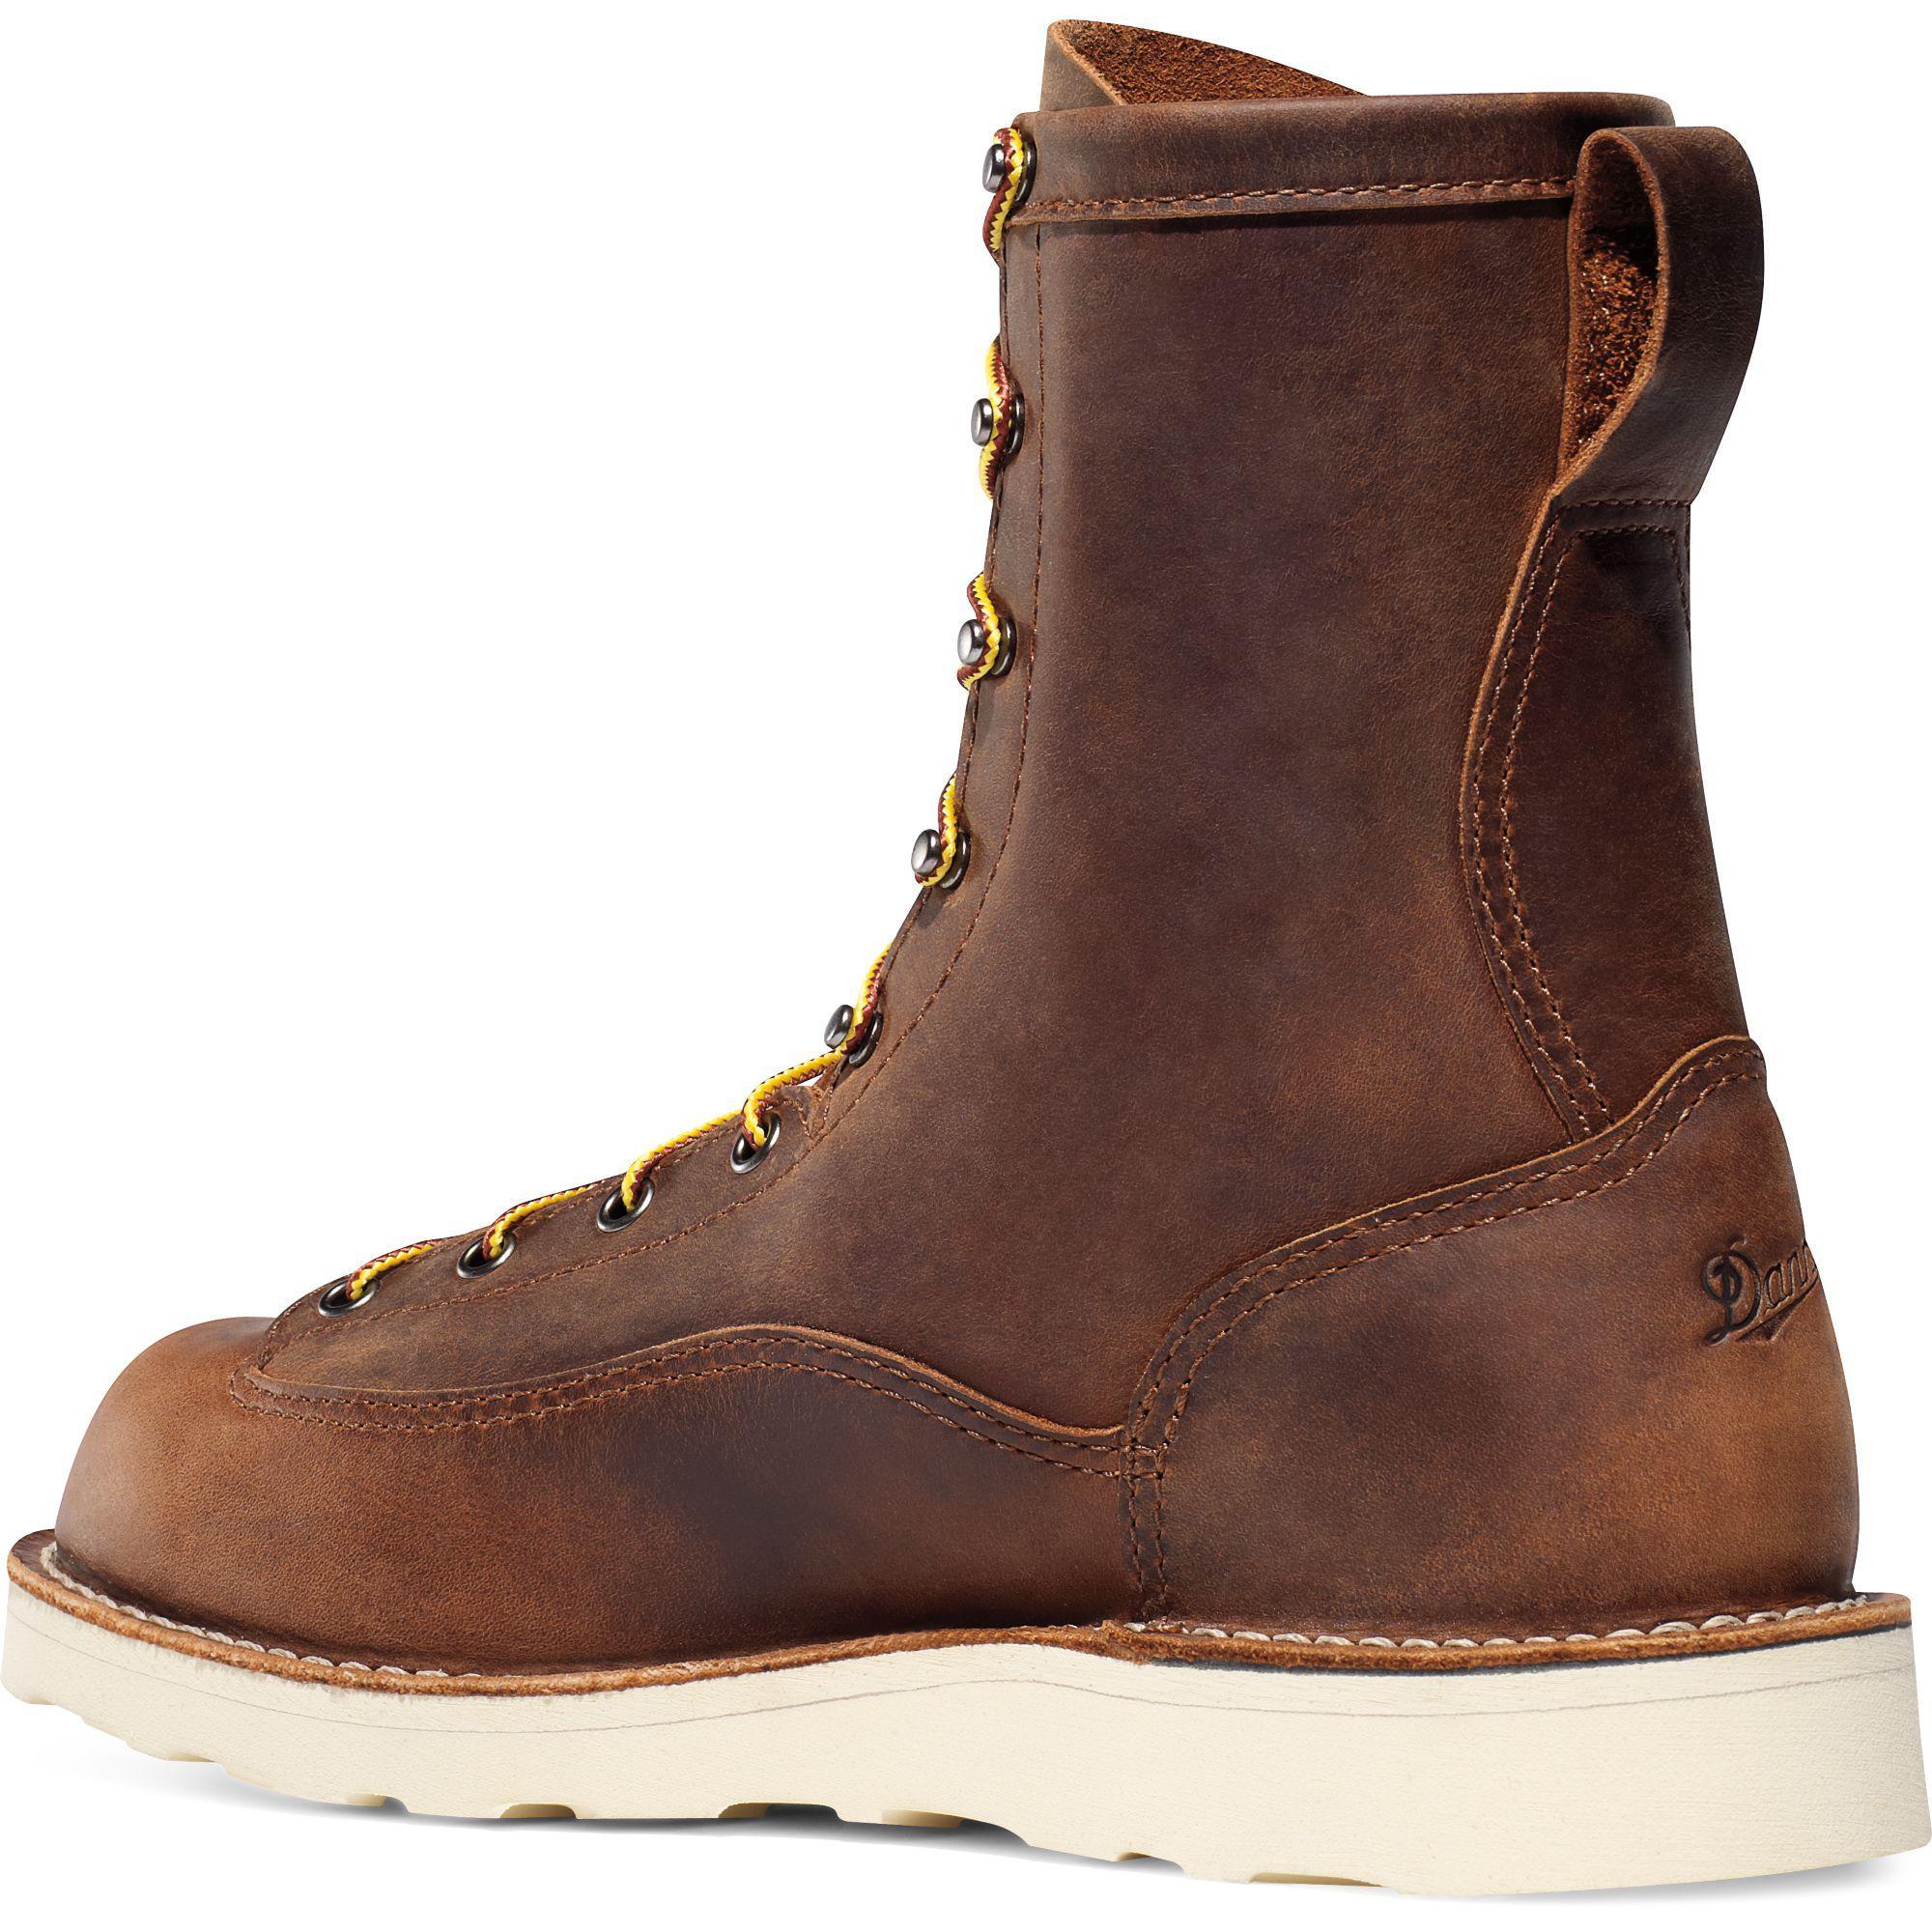 Danner Work Boots – Free Shipping 